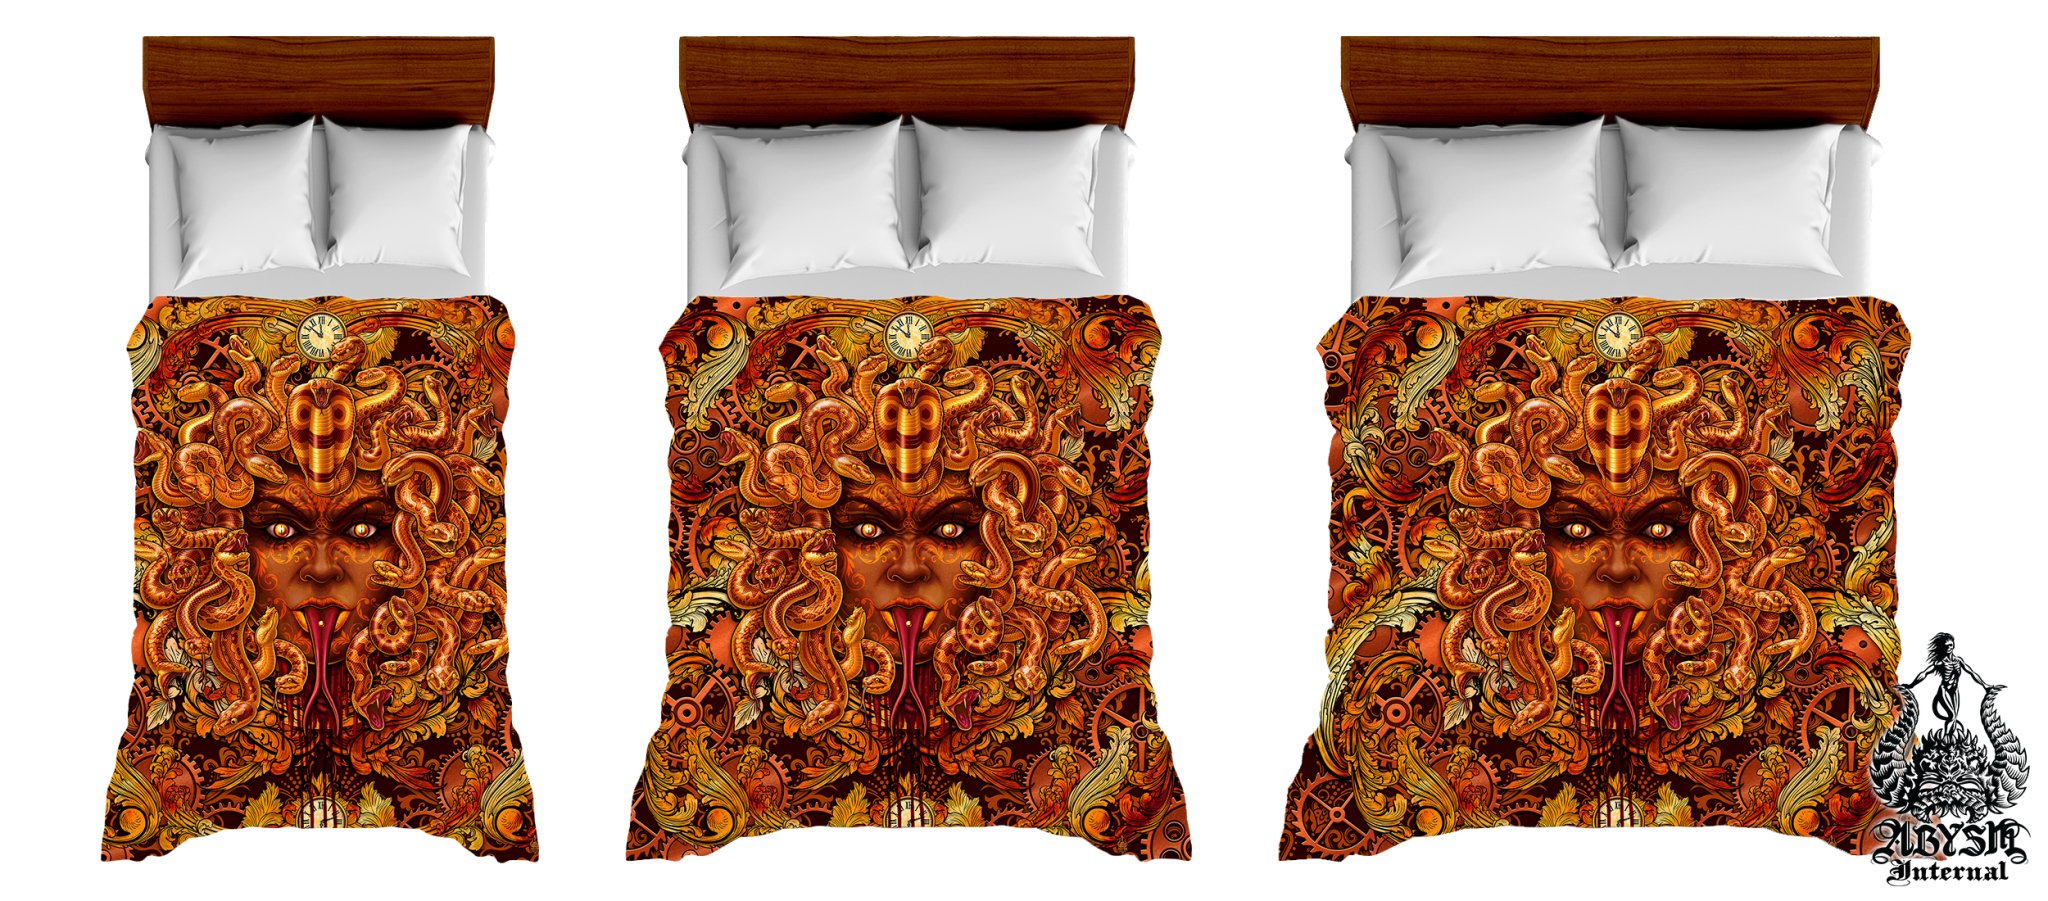 Steampunk Bed Cover, Comforter or Duvet, Victorian Goth Bedding Set, Bedroom Decor, King, Queen & Twin Size - Medusa Skull, 3 Faces - Abysm Internal